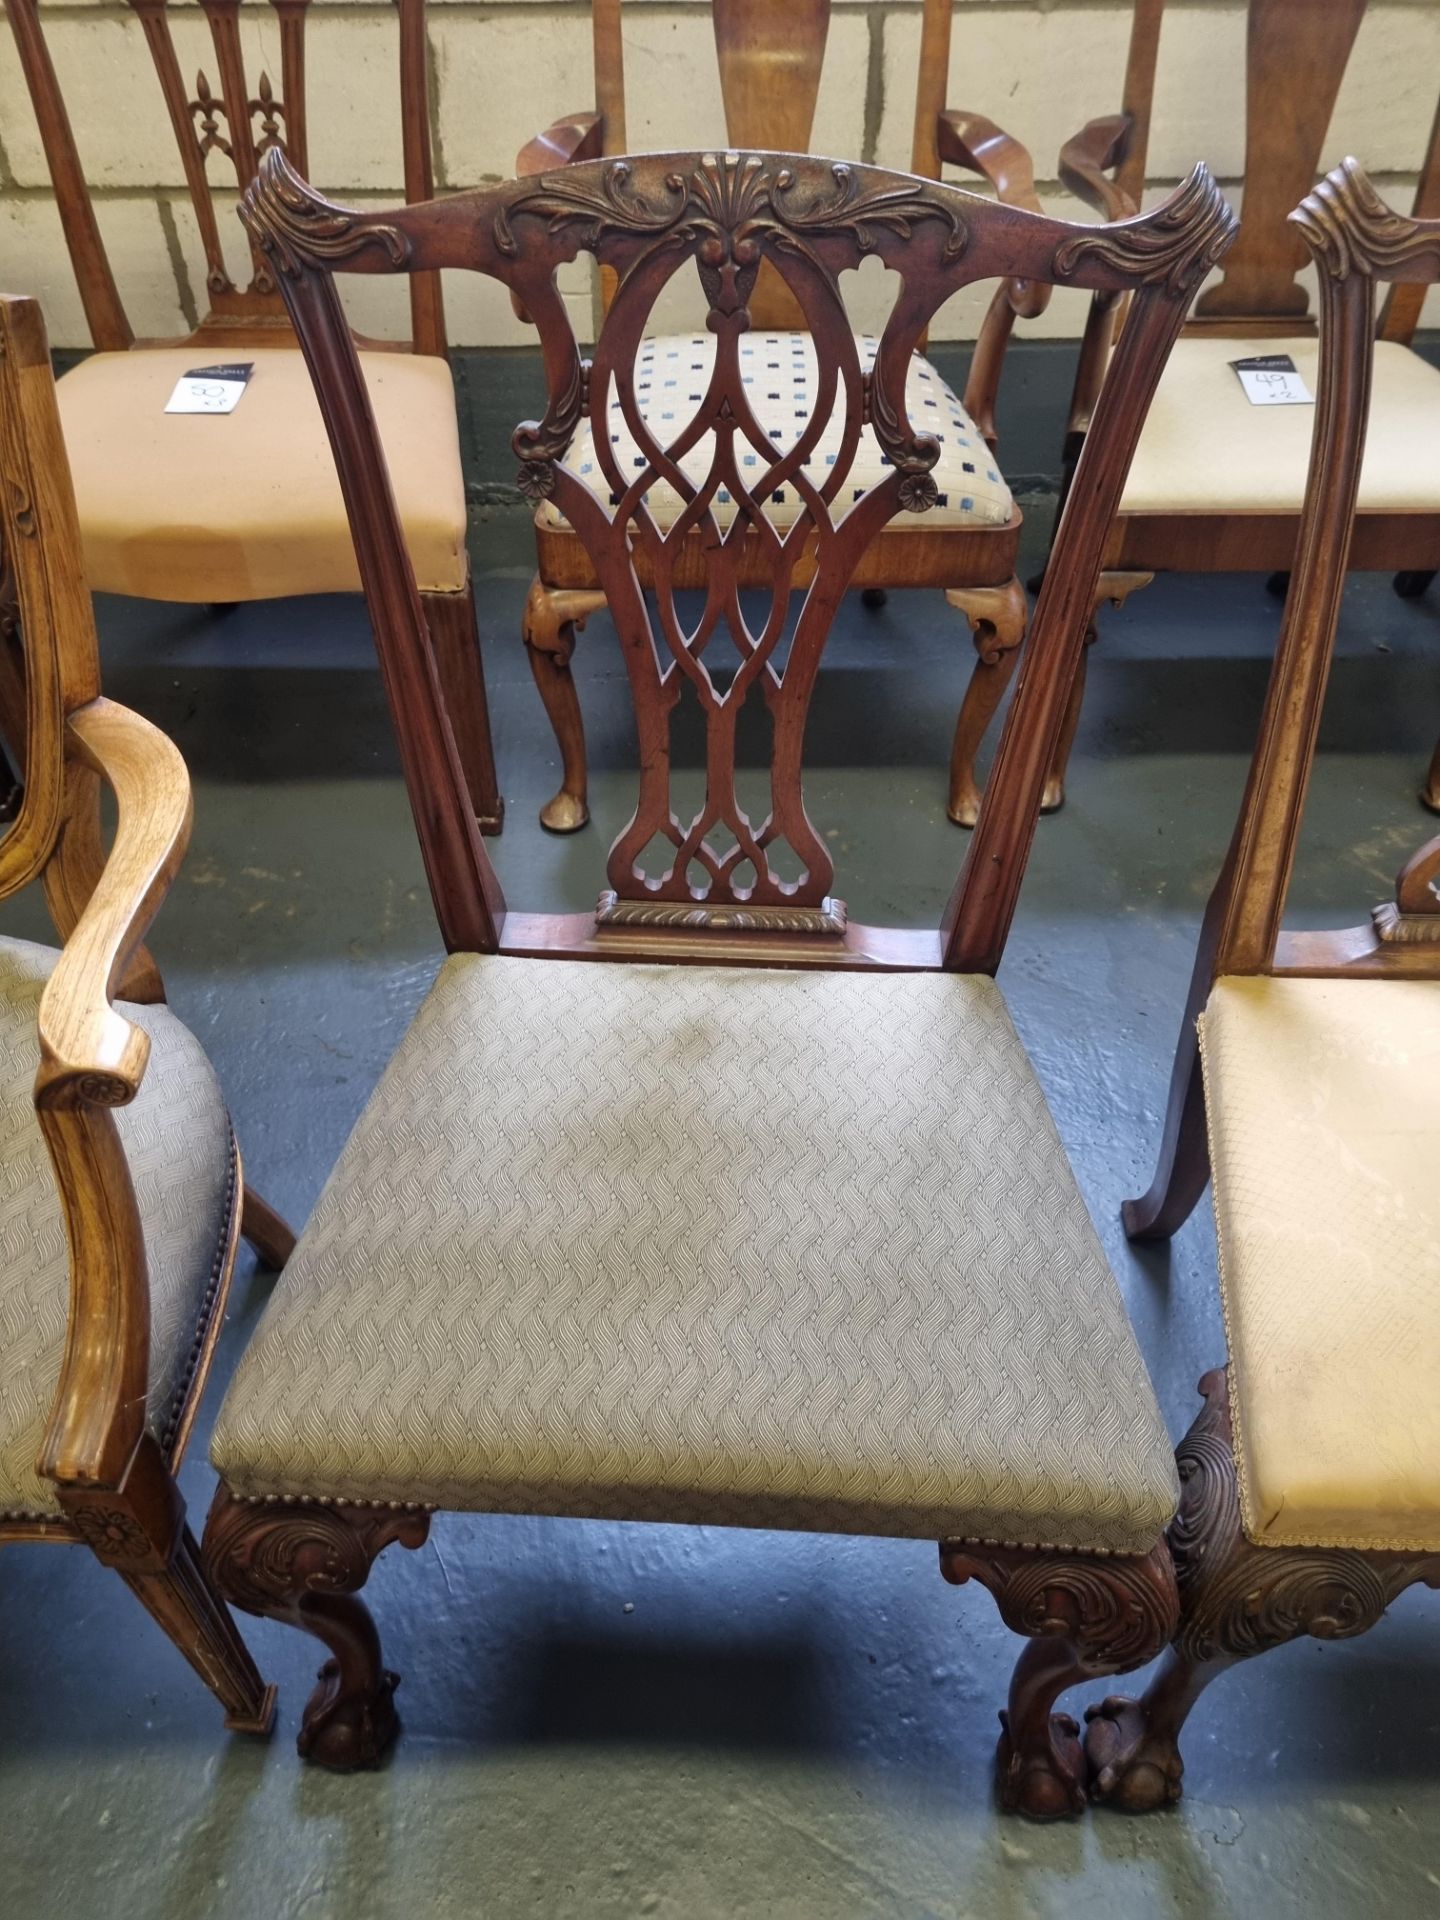 3 X Arthur Brett Mid-Georgian-Style Carved Mahogany Upholstered Dining Chairs With Brown - Image 2 of 5